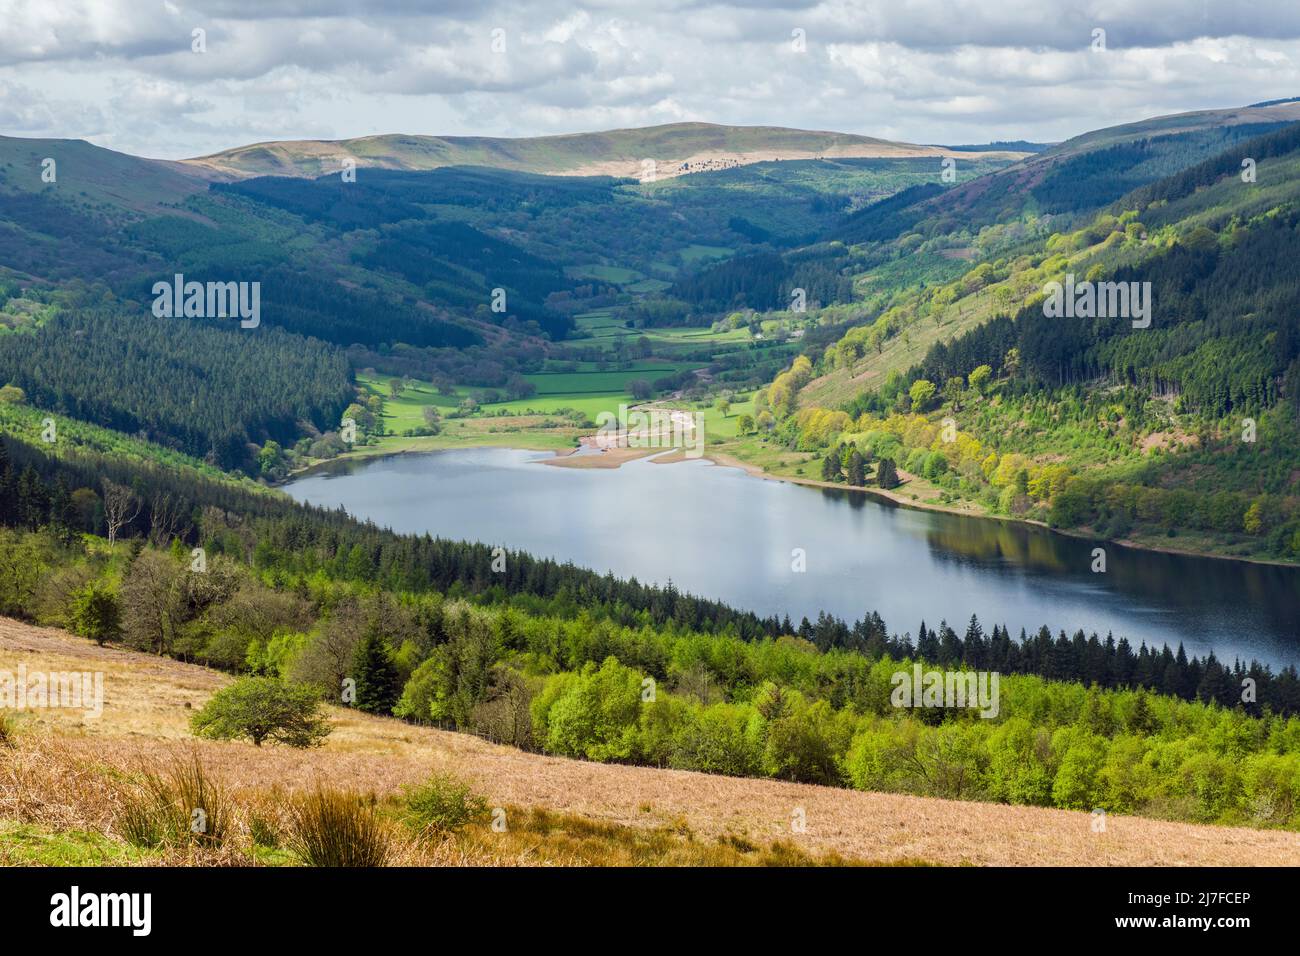 Looking down onto the Talybont Reservoir and Valley as well as the wooded areas with evergteen and deciduous trees Stock Photo